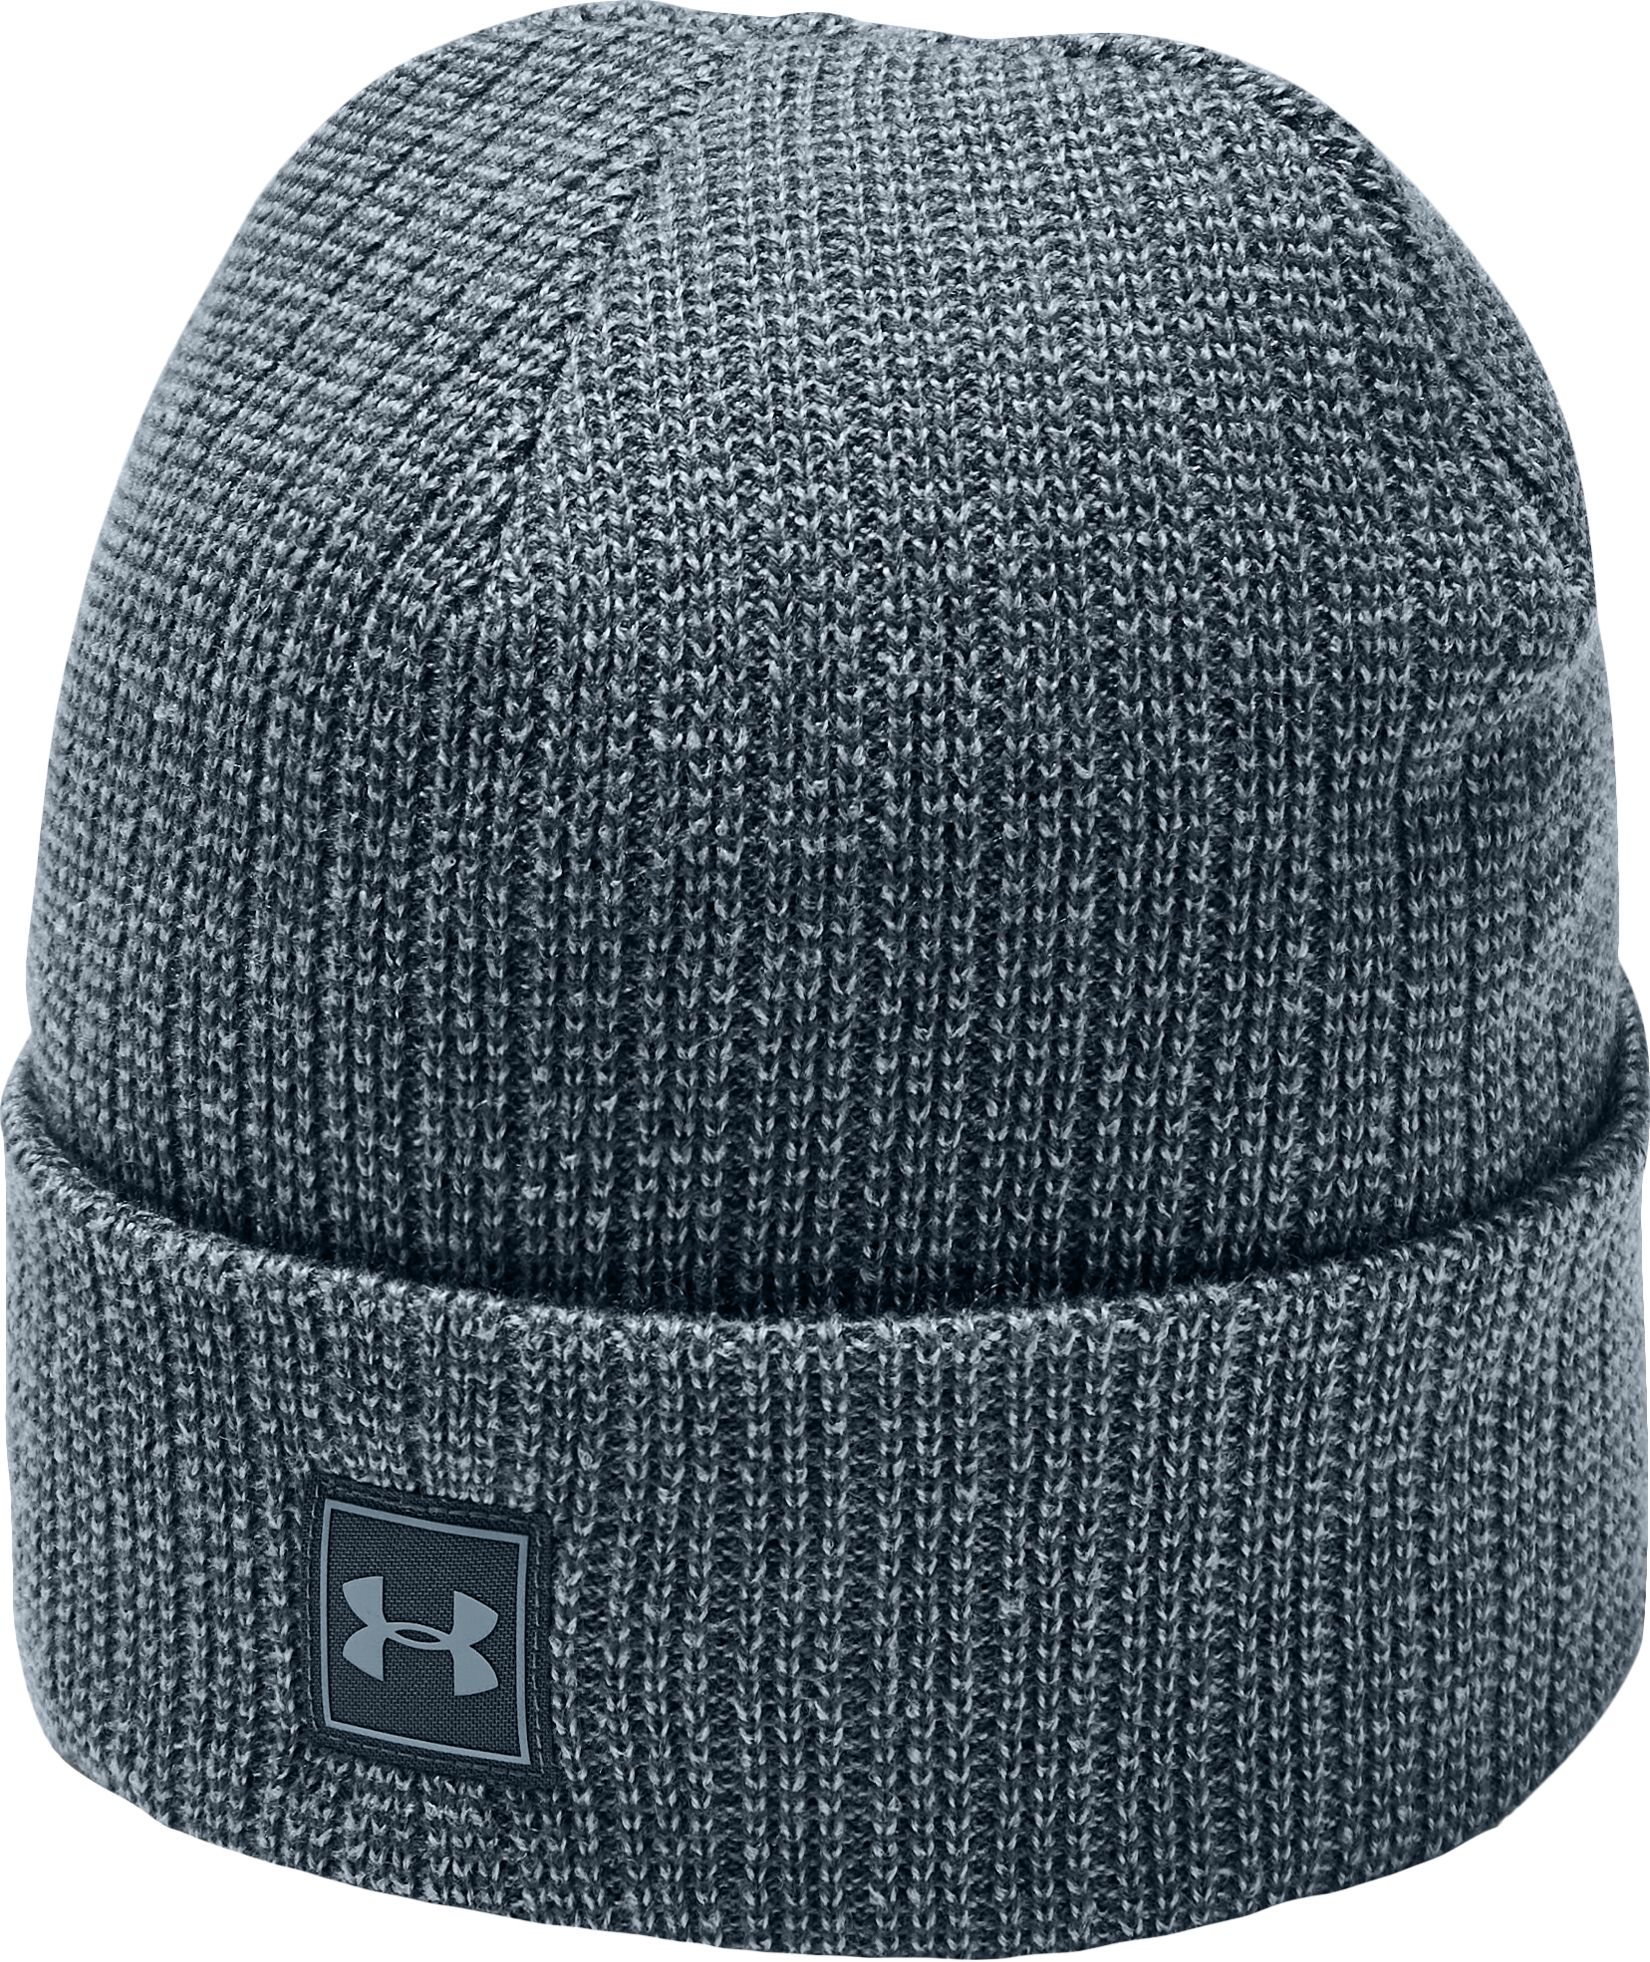 Under Armour Winter Hats | DICK'S 